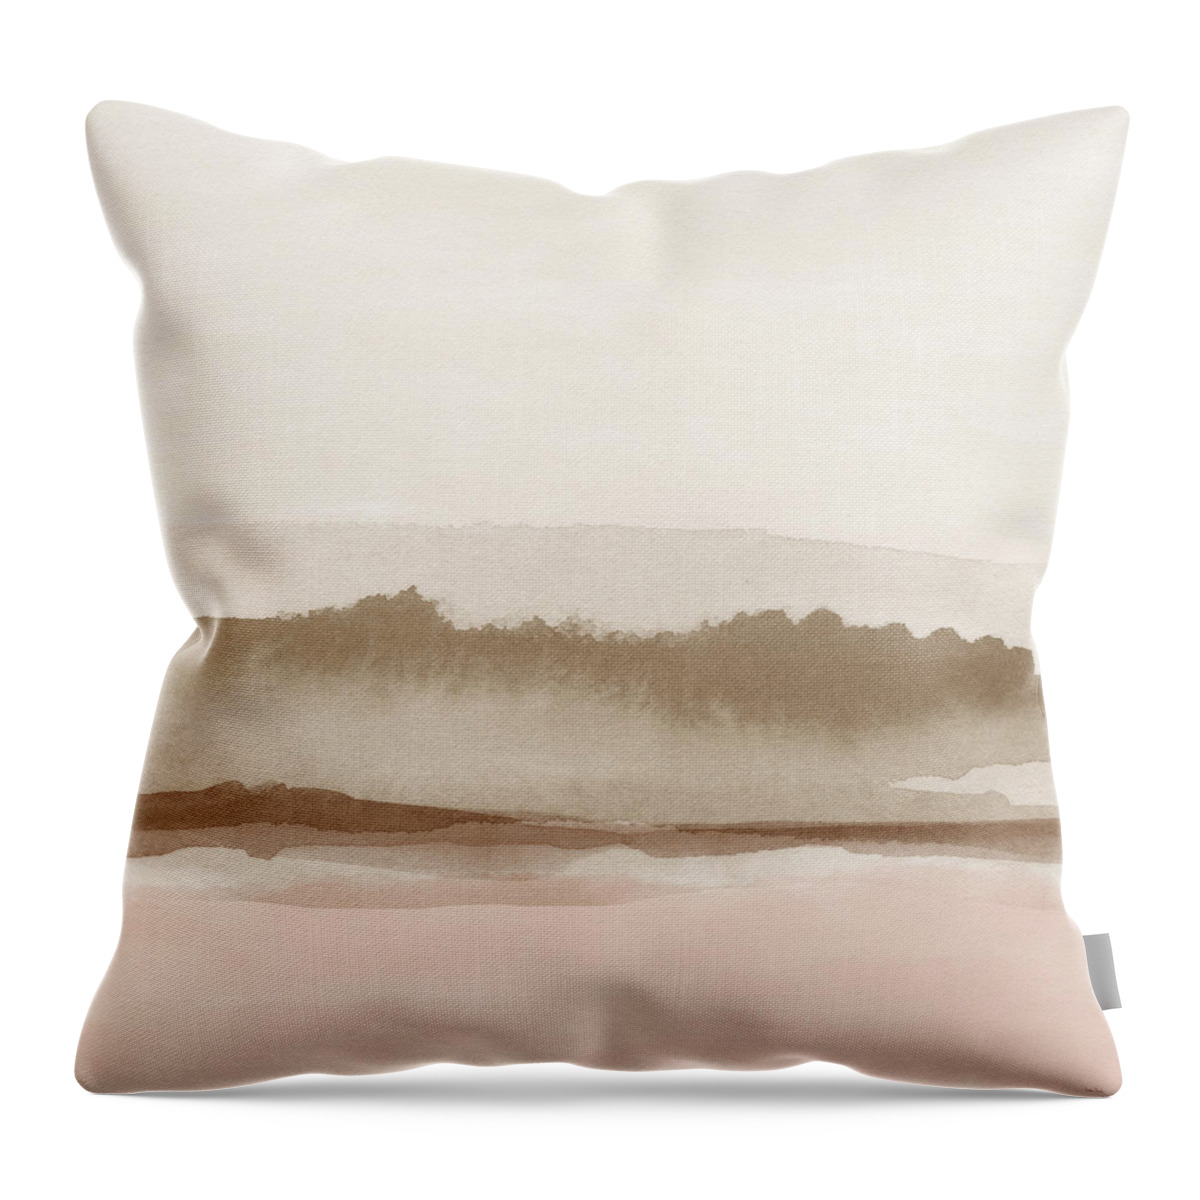 Desert Throw Pillow featuring the painting Canyon Landscape- Art by Linda Woods by Linda Woods